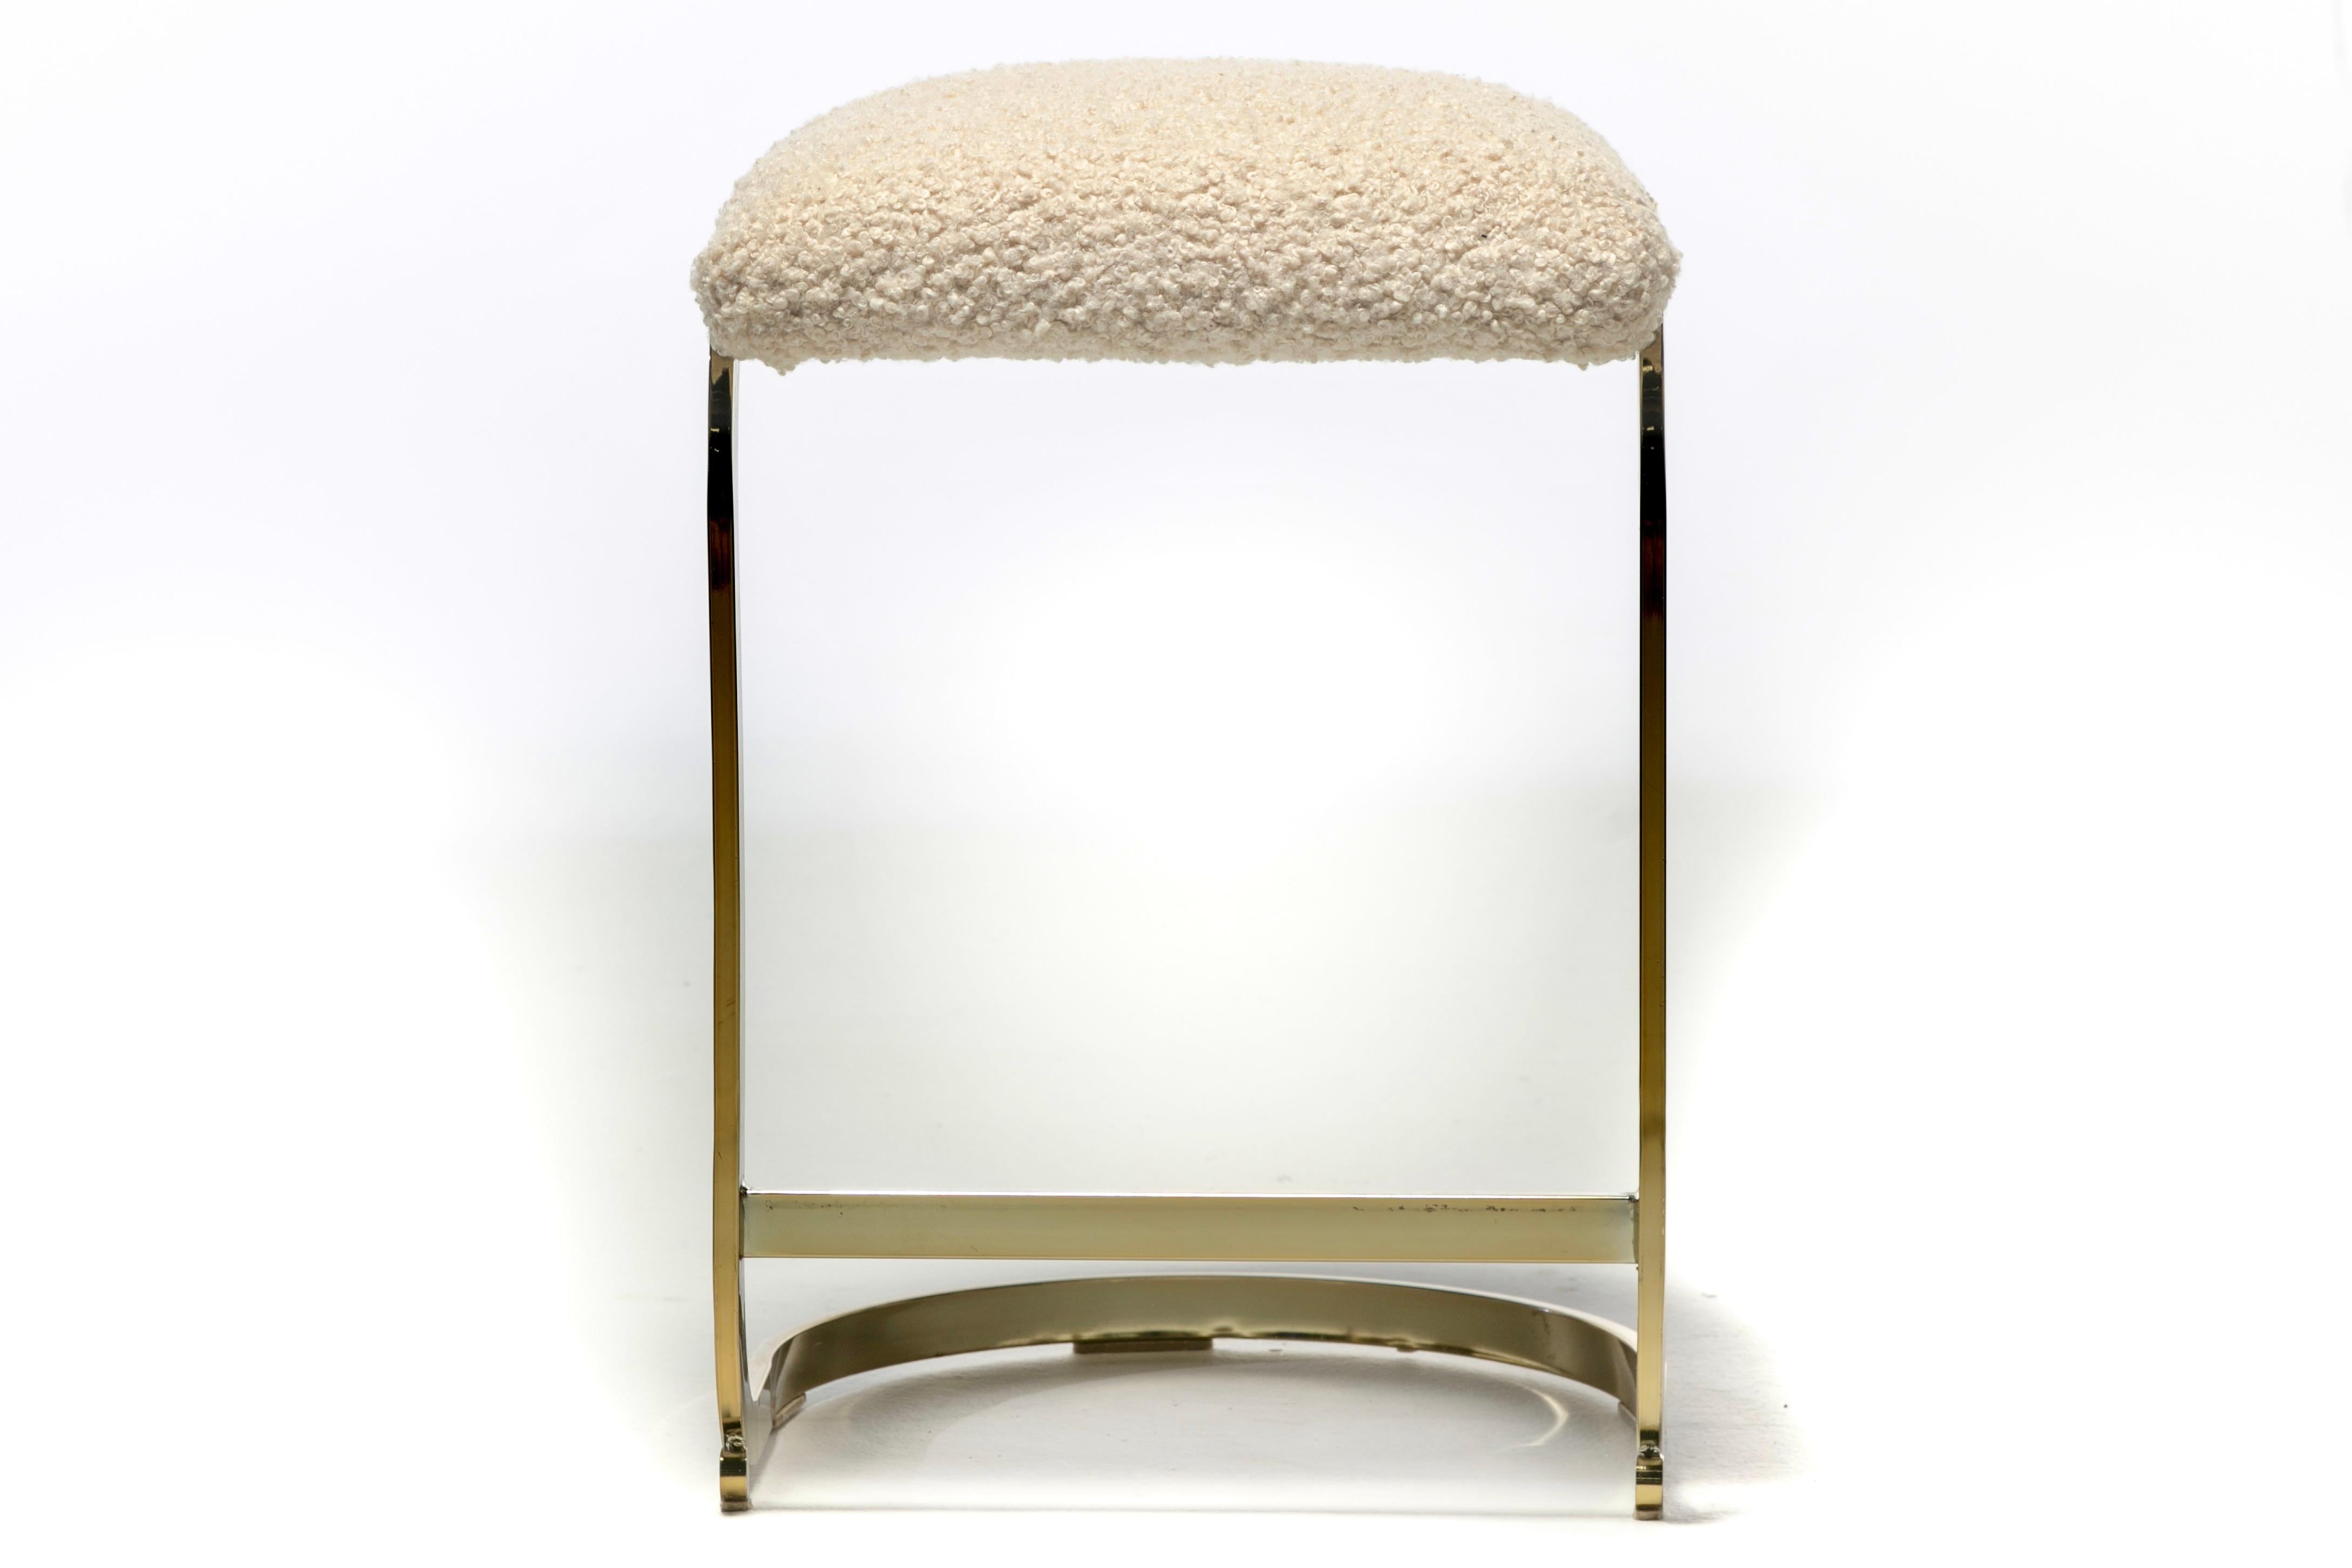 Set of 3 Design Institute of America Brass Stools in Ivory White Bouclé, c. 1980 For Sale 7